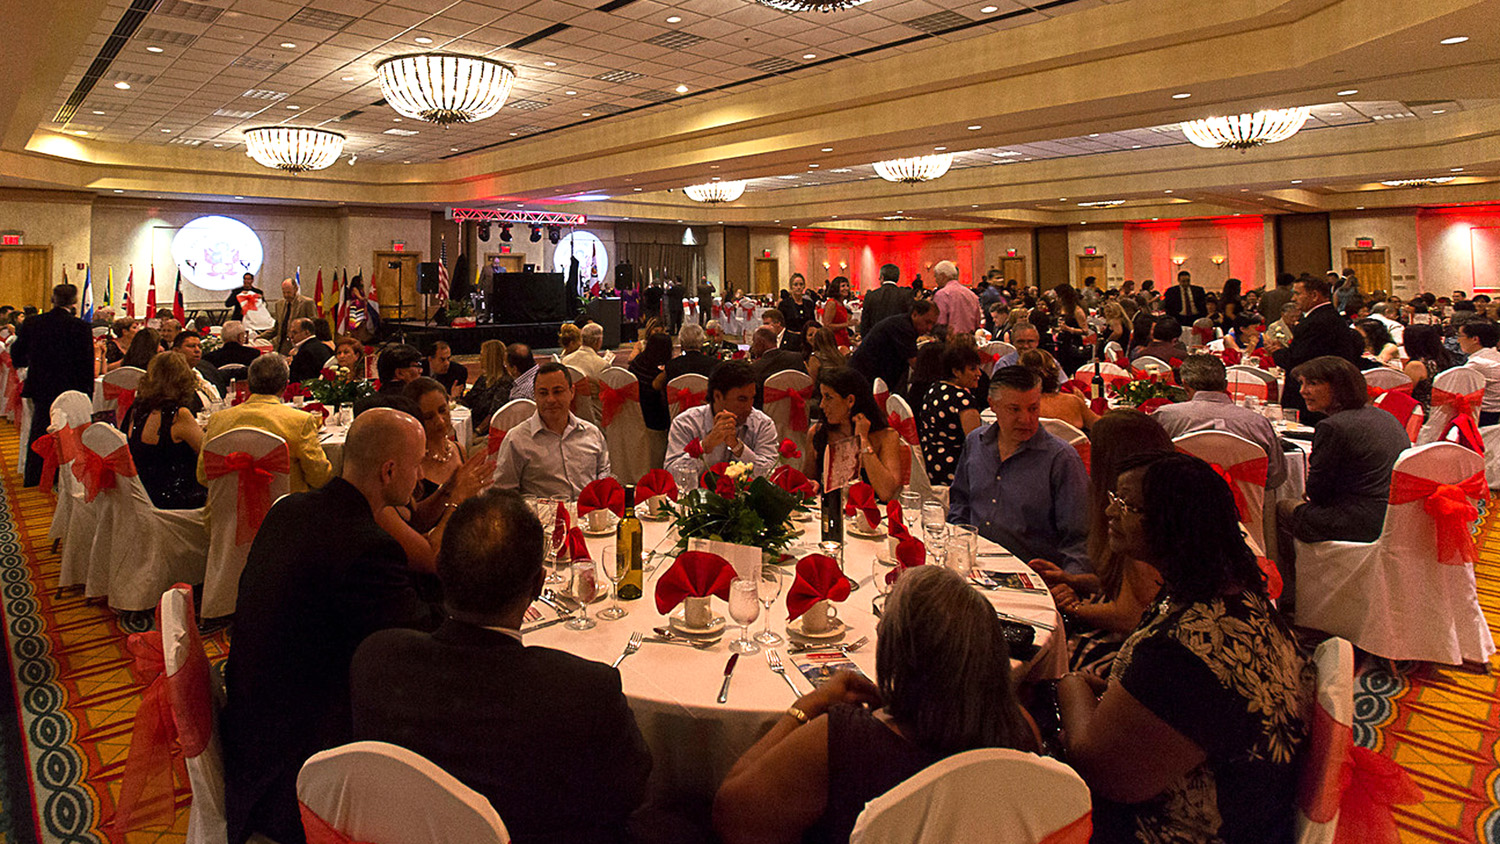 In 2013 the theme was Peru. Photo courtesy City of Coral Springs